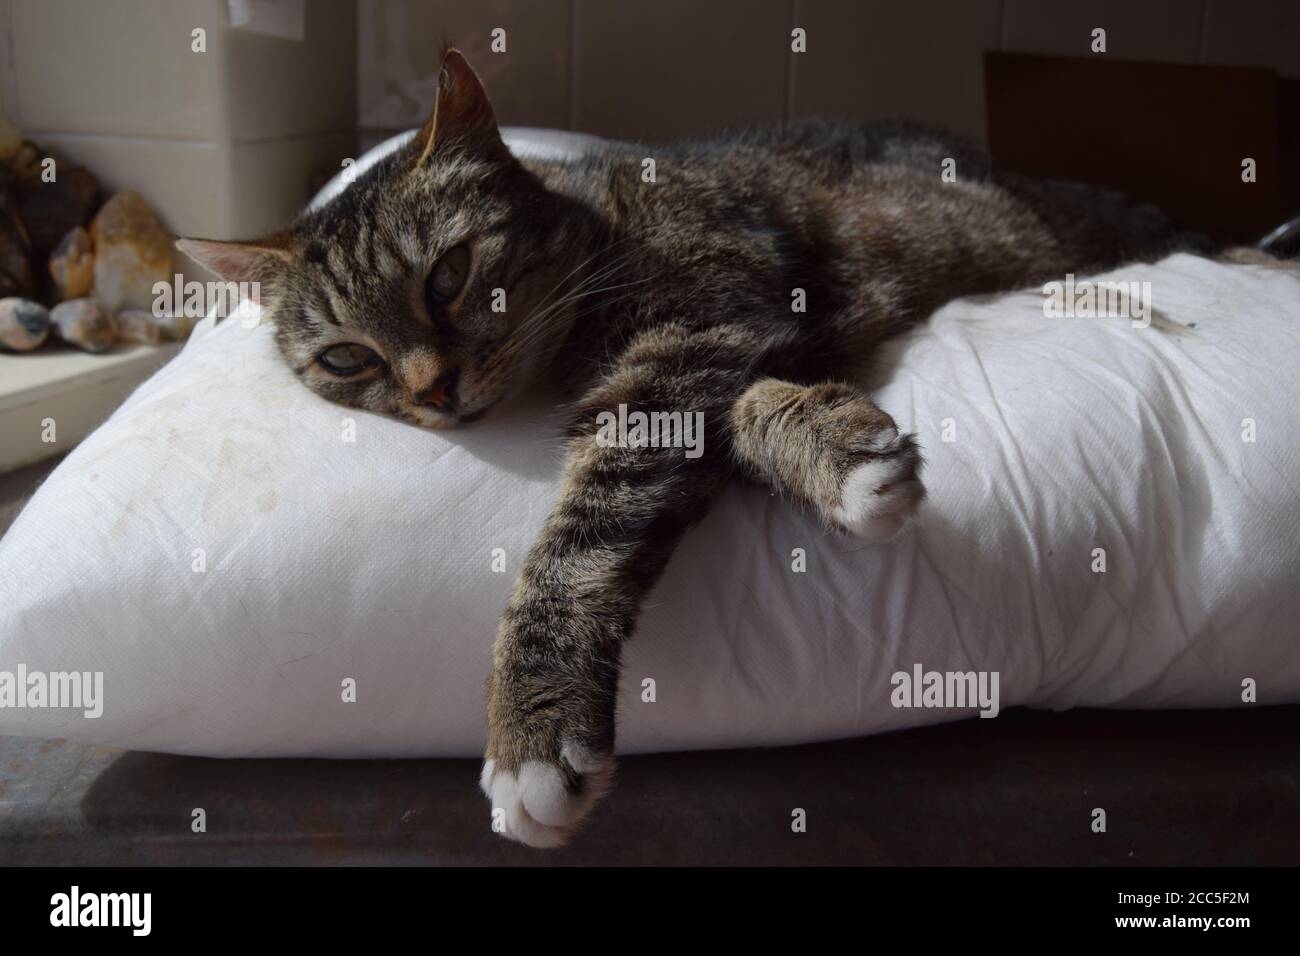 Tabby cat at rest Stock Photo